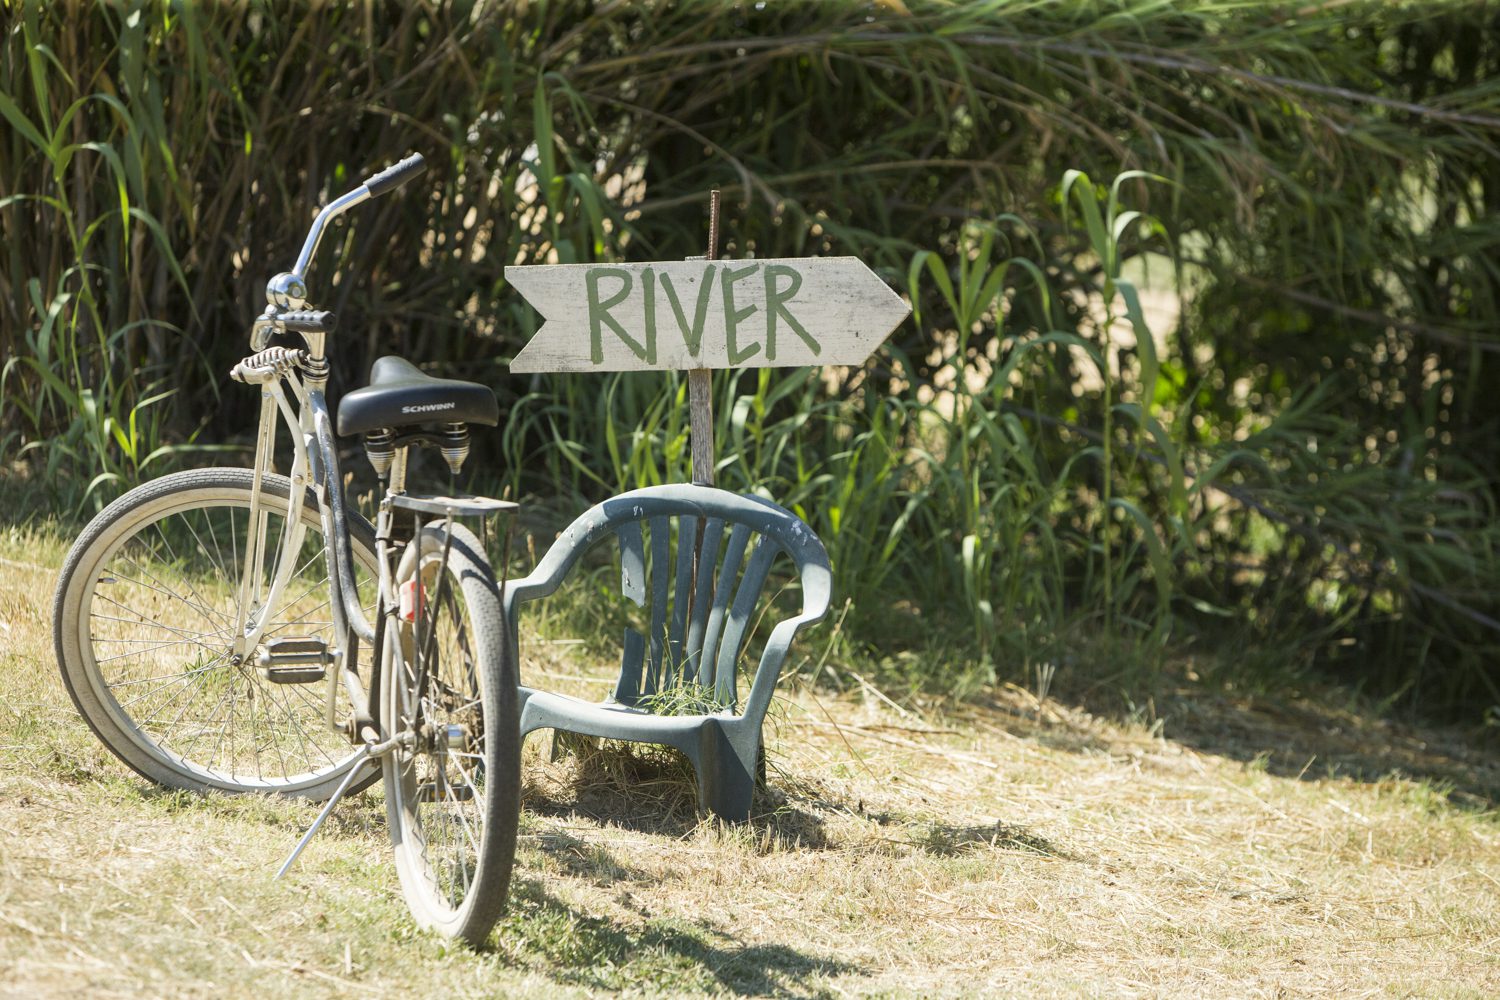 A bicycle is parked next to a chair and a sign.